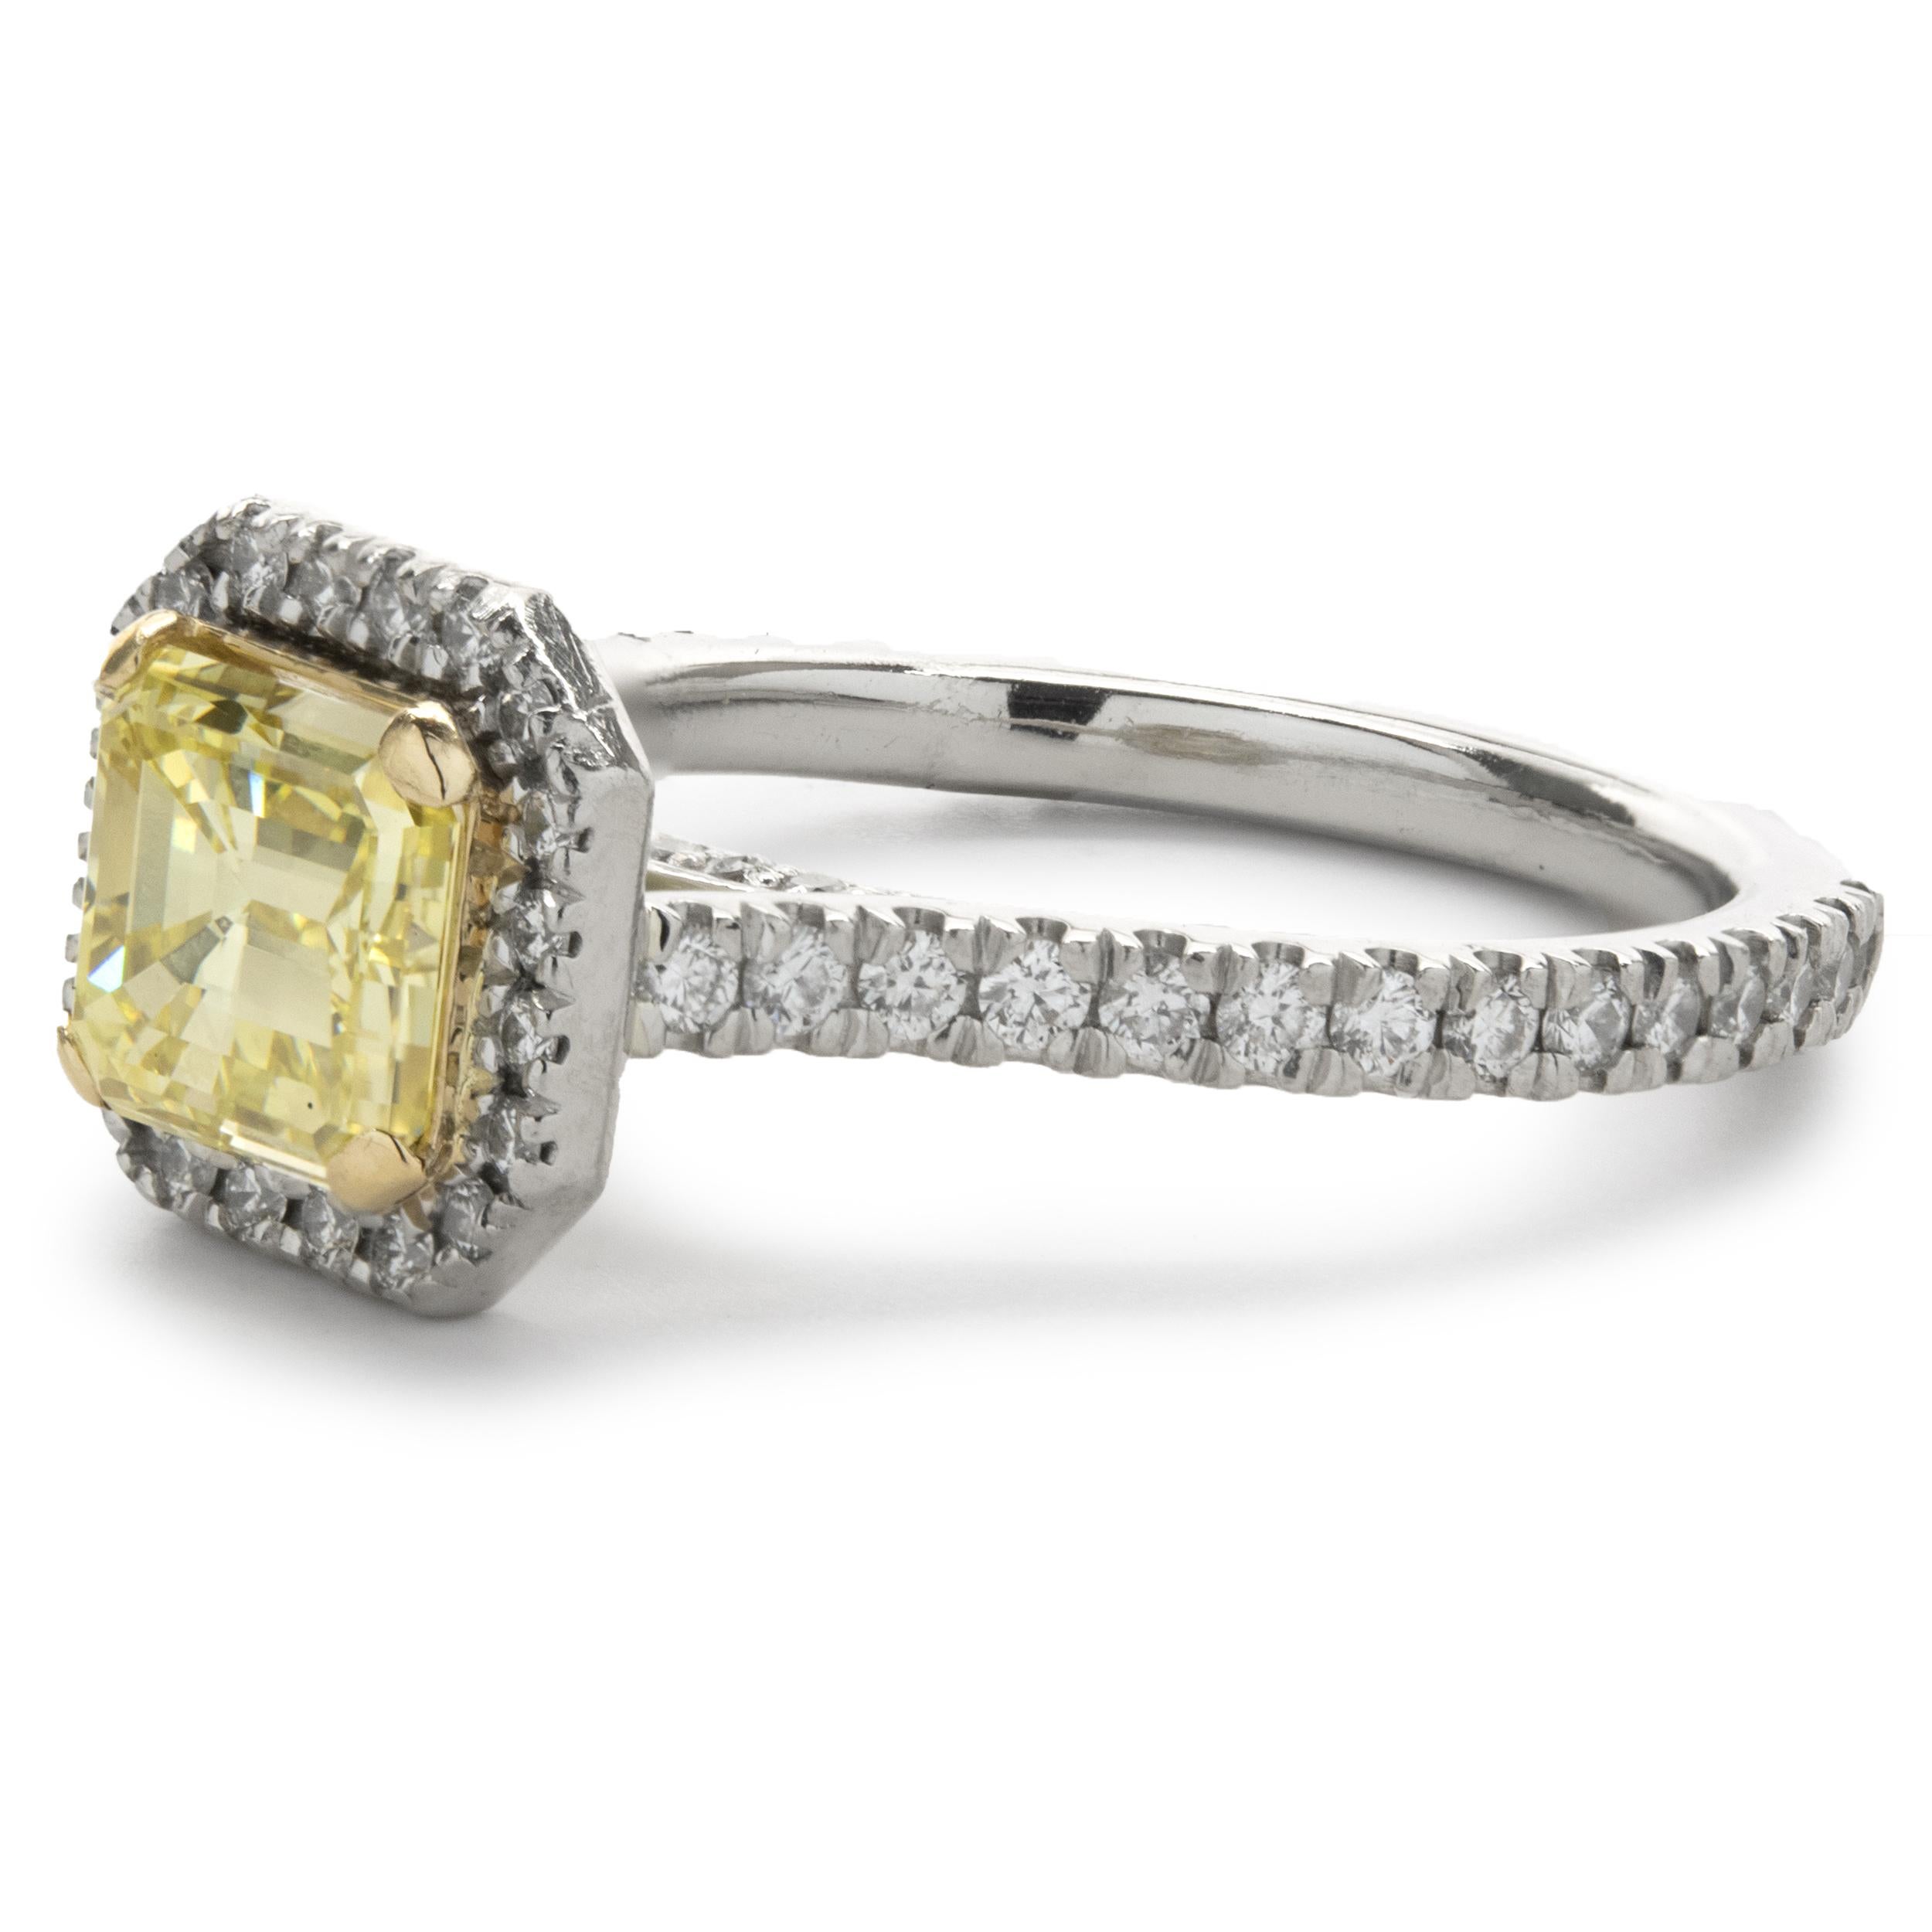 Designer: custom
Material: platinum
Diamond: 1 emerald cut = 1.39ct
Color: Fancy Intense Yellow
Clarity: VVS2
GIA: 2155585501
Diamond: 64 round cut = 0.64cttw
Color: G
Clarity: SI1
Ring Size: 6 (please allow up to 2 additional business days for